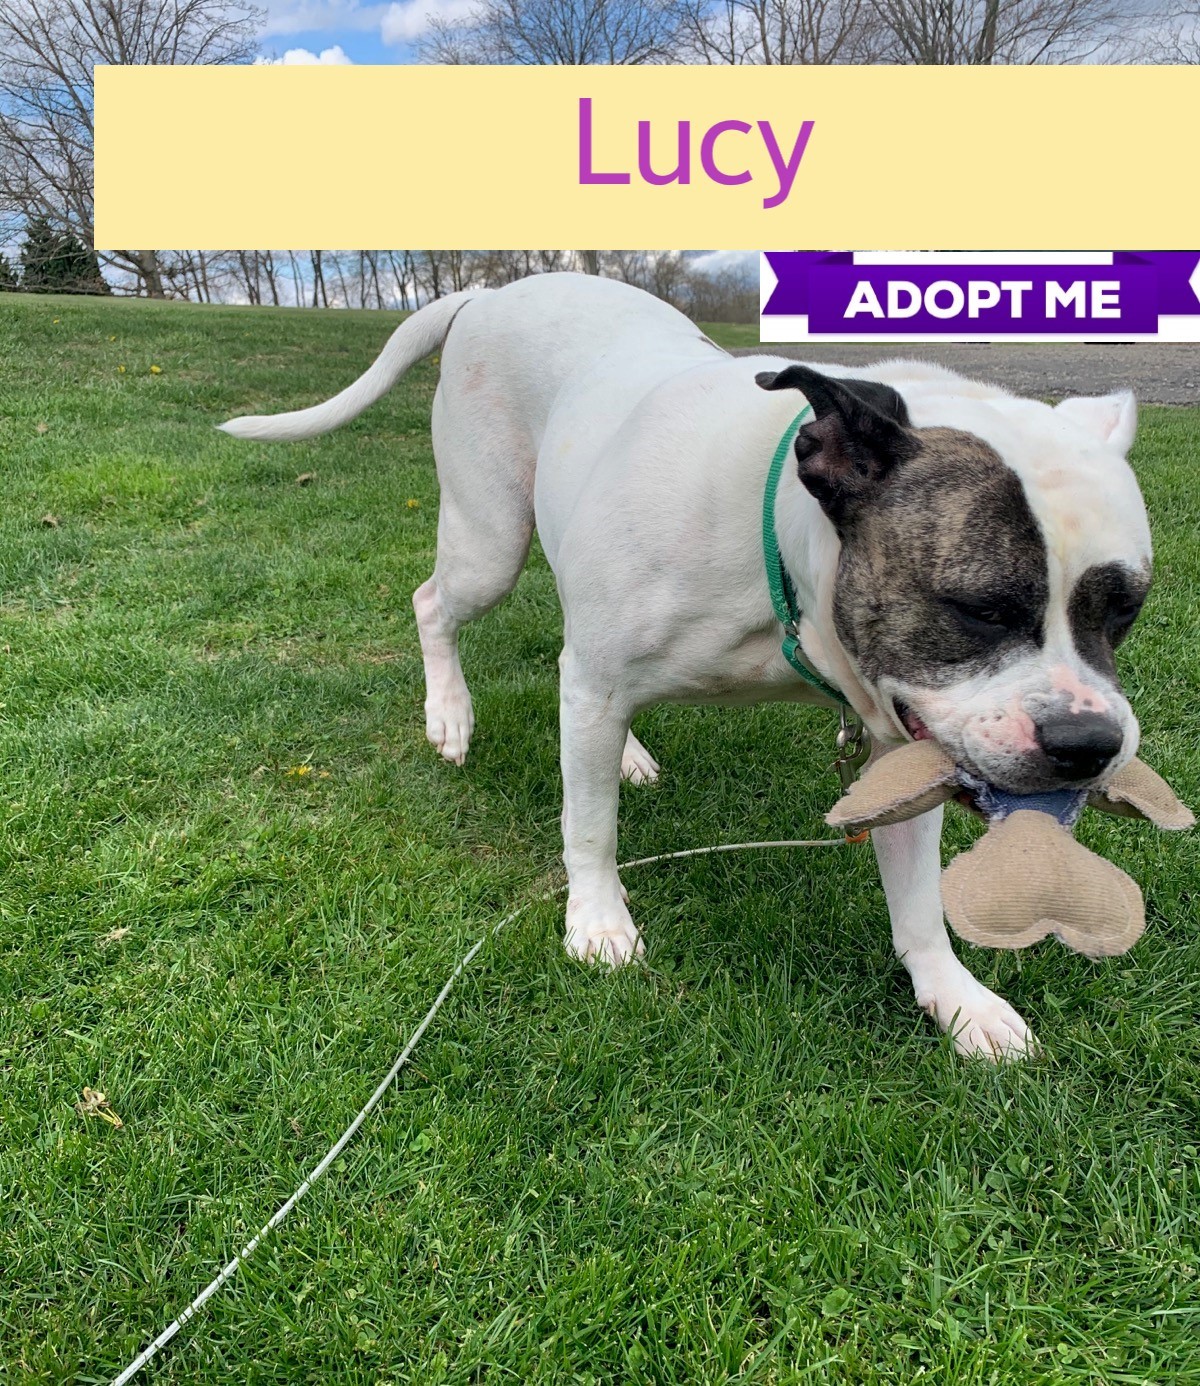 Lucy American Bulldog Mix detail page